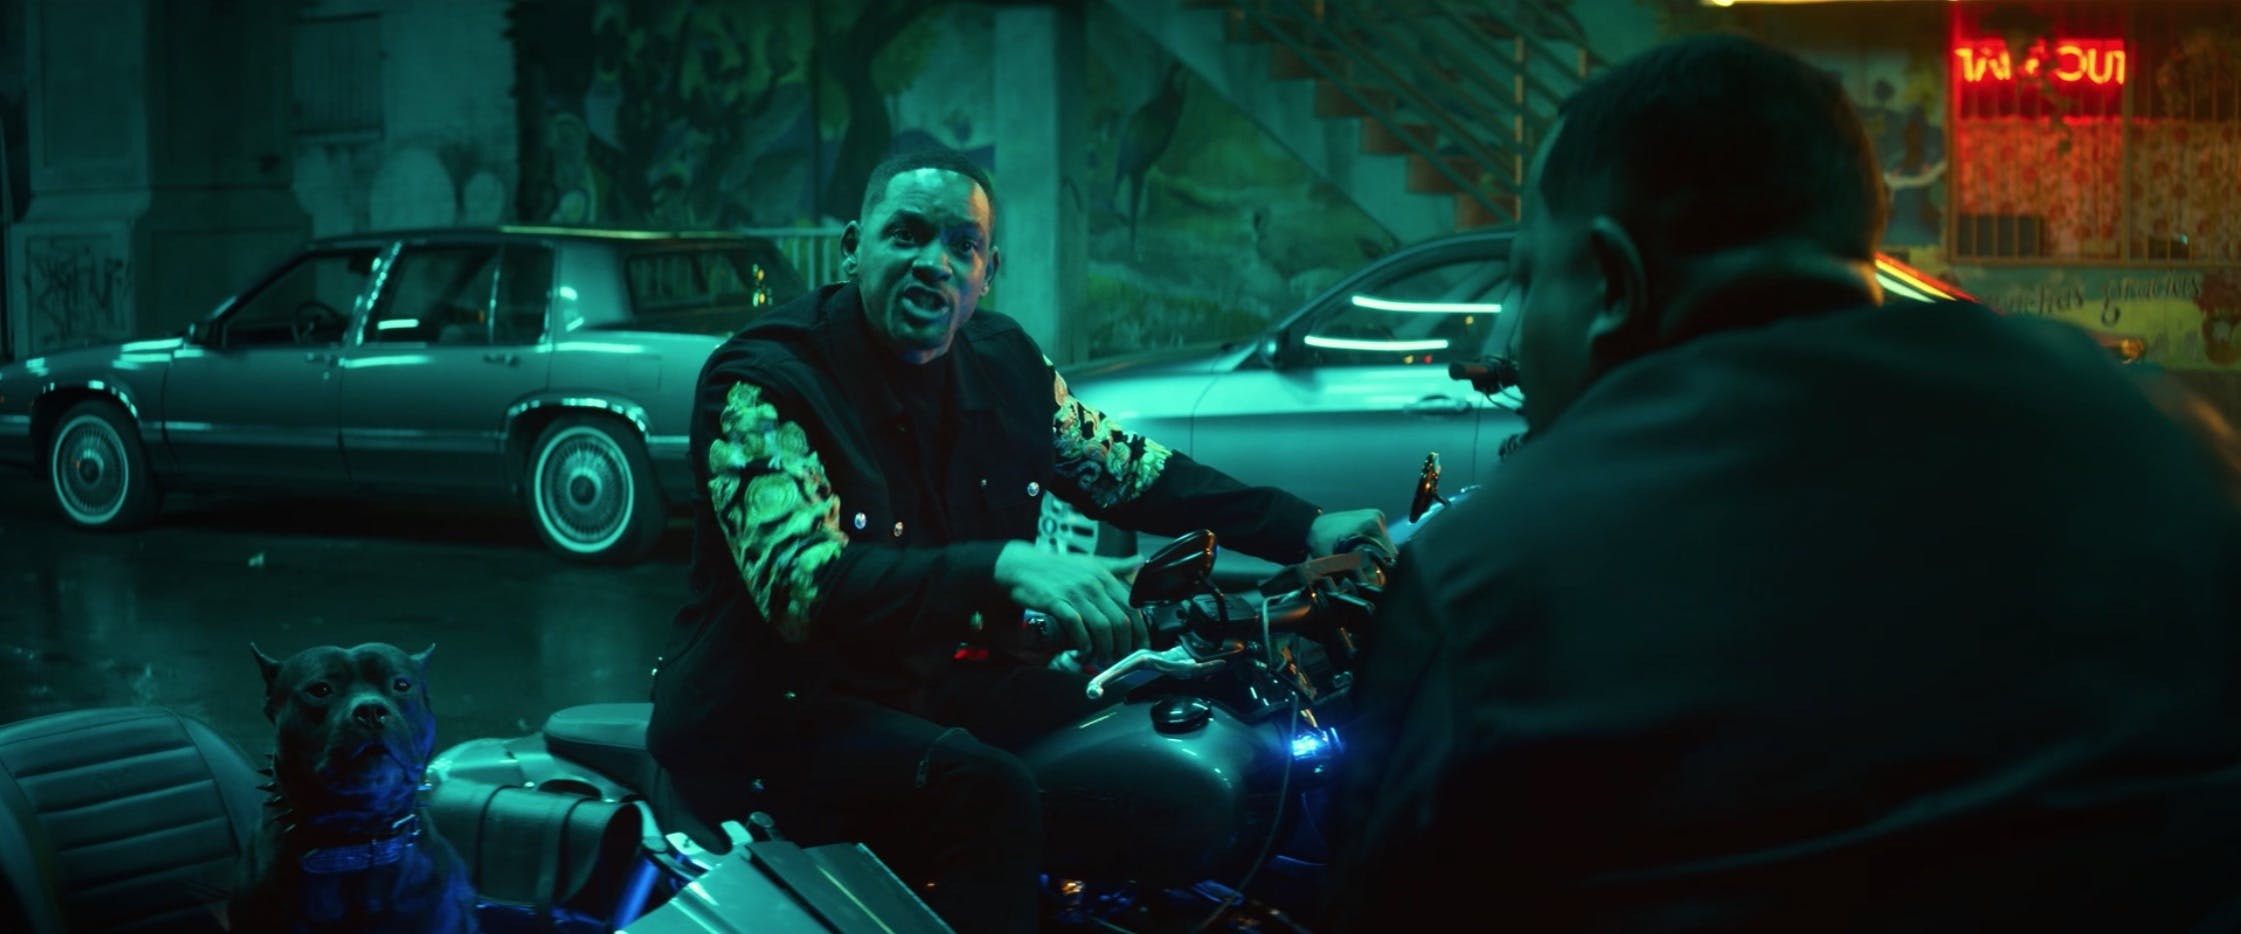 Bad Boys For Life will smith on motorcycle talking to martin lawrence